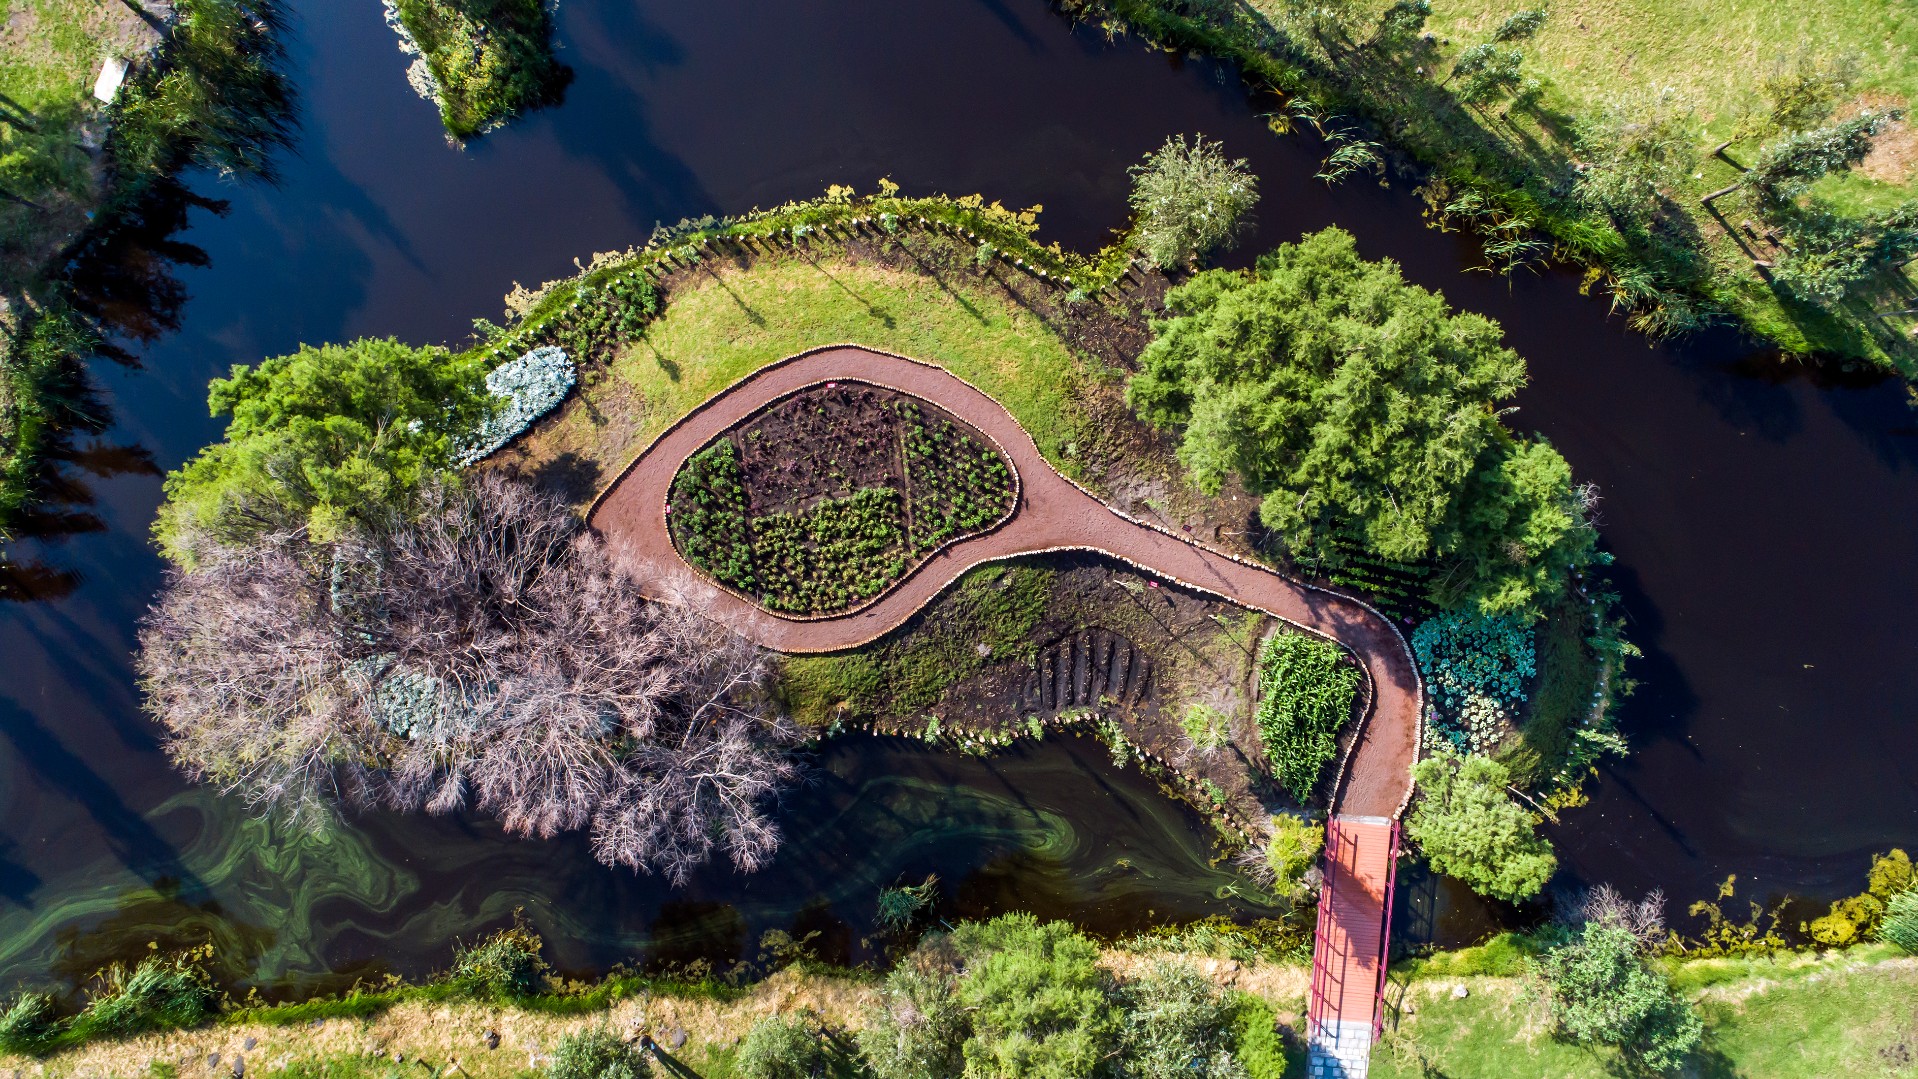 Aerial view of a Chinampa (small, stationary artificial island) at Xochimilco Ecological Park, Mexico City.